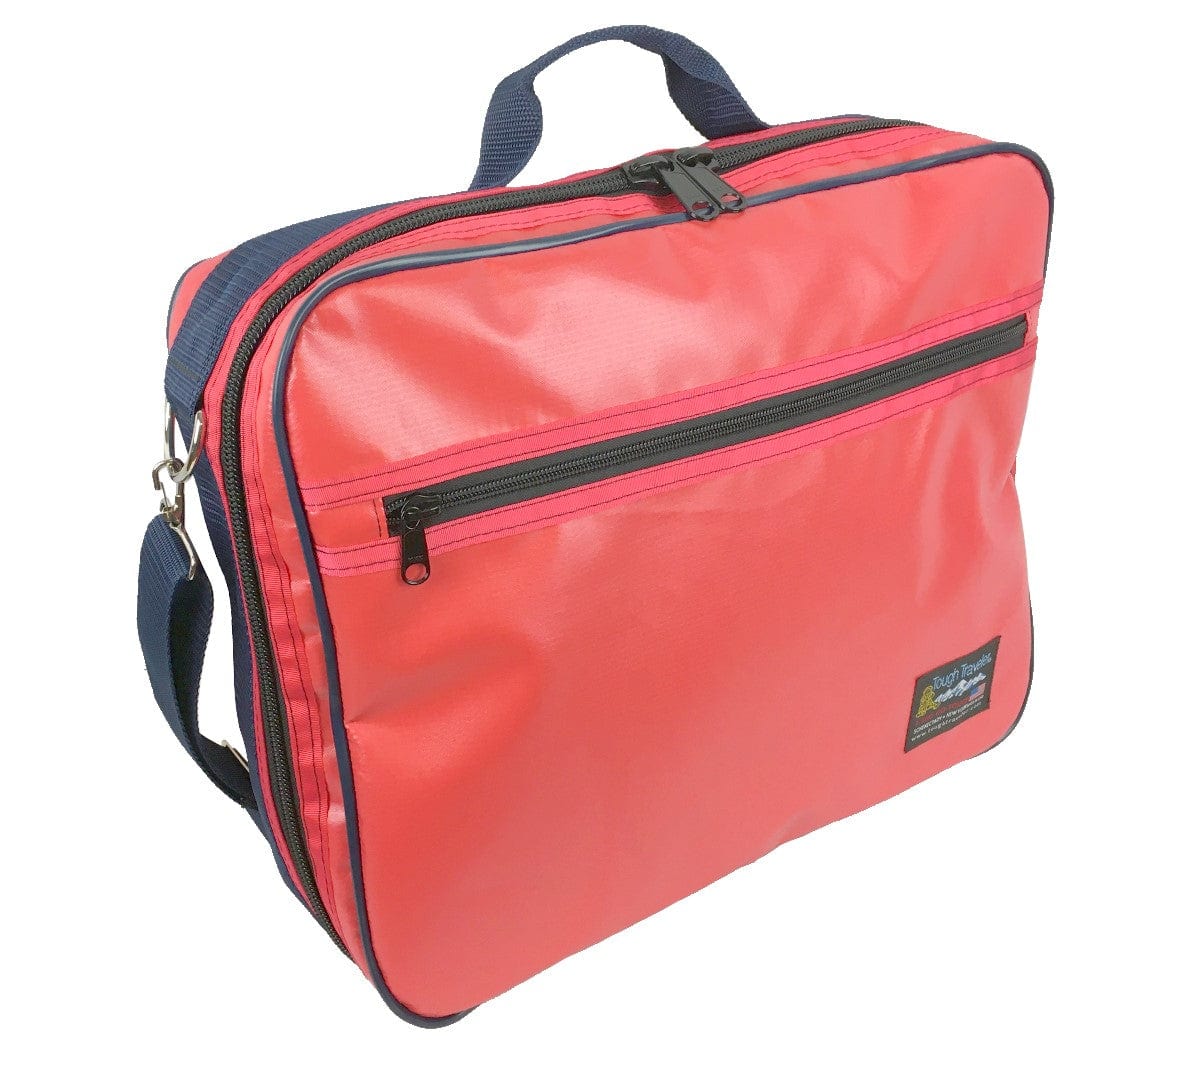 Made in USA VECTOR Small Carryon Luggage